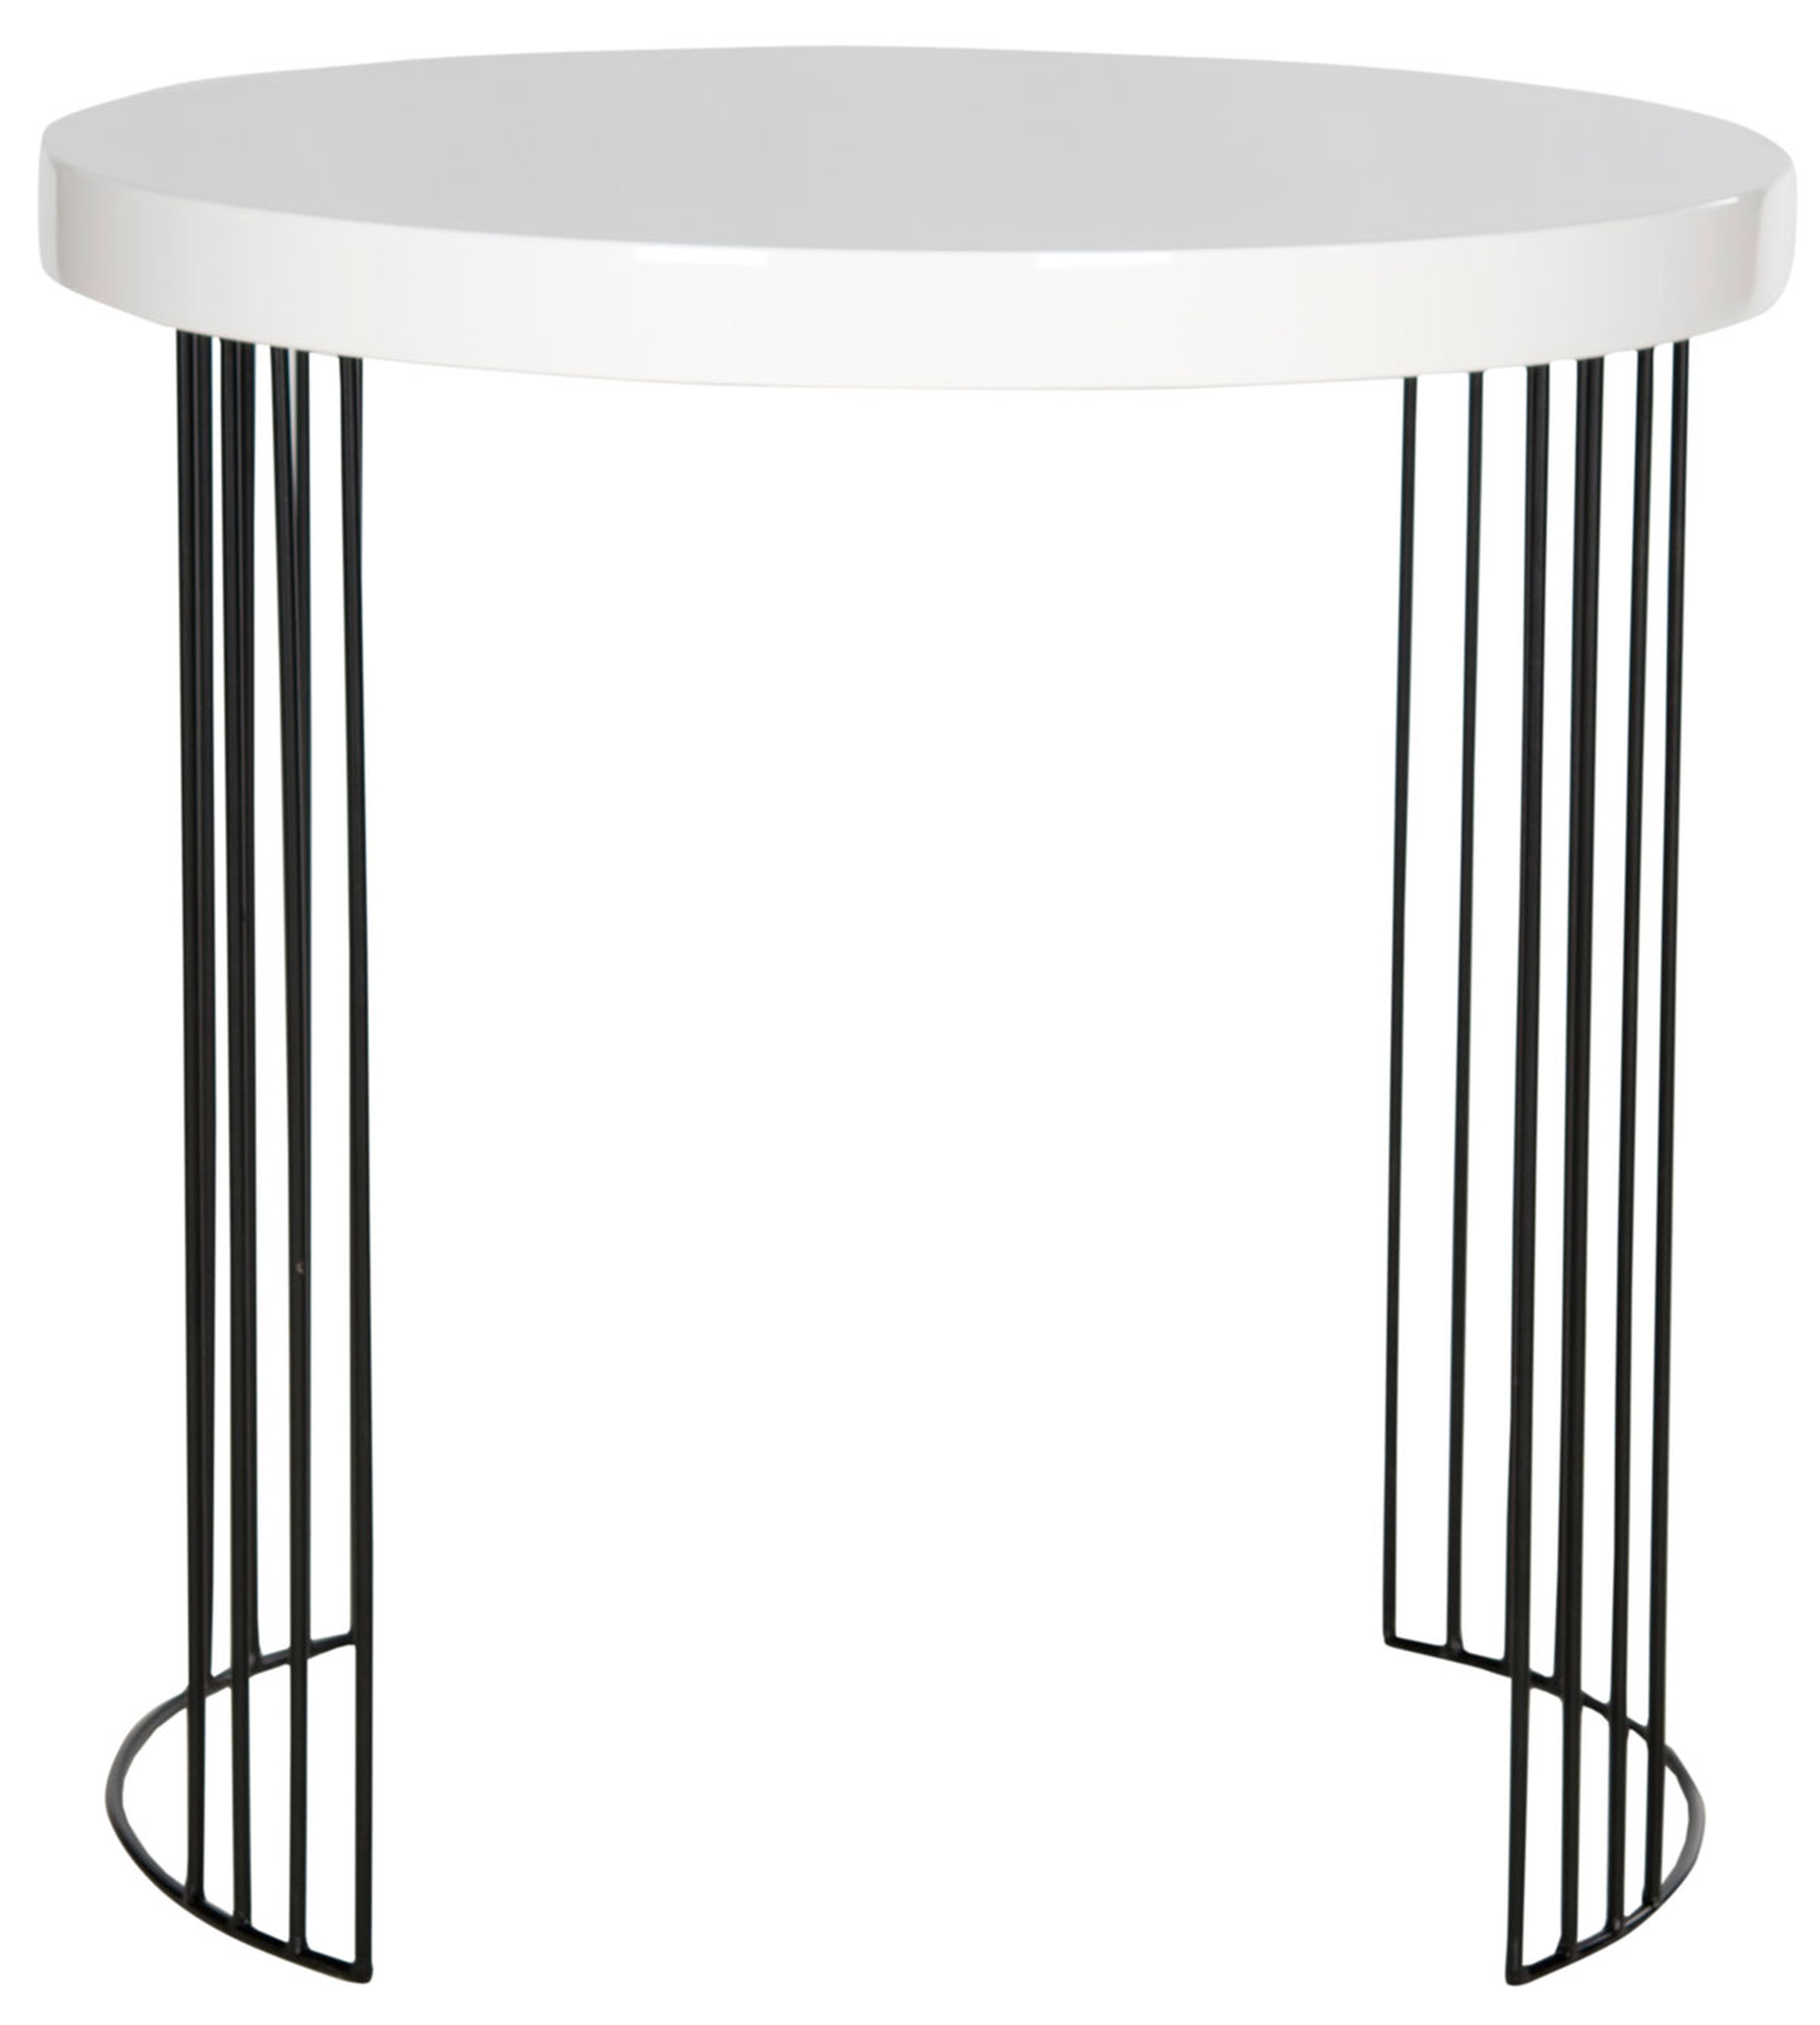 Kelly Mid Century Scandinavian Lacquer Side Table - White - Arlo Home - Arlo Home